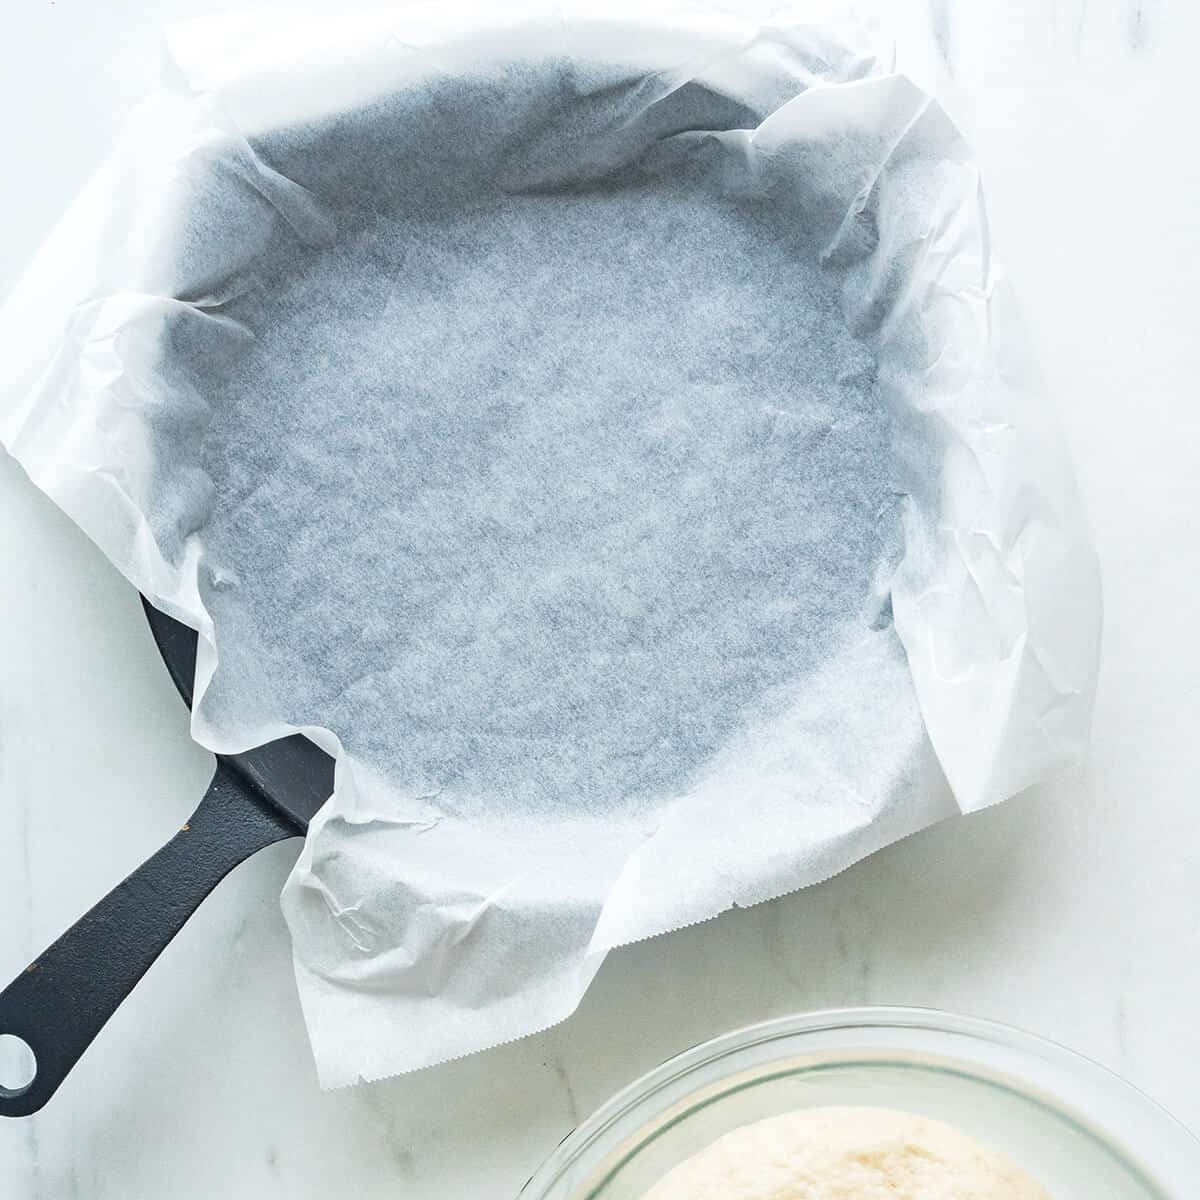 A skillet lined with parchment paper.